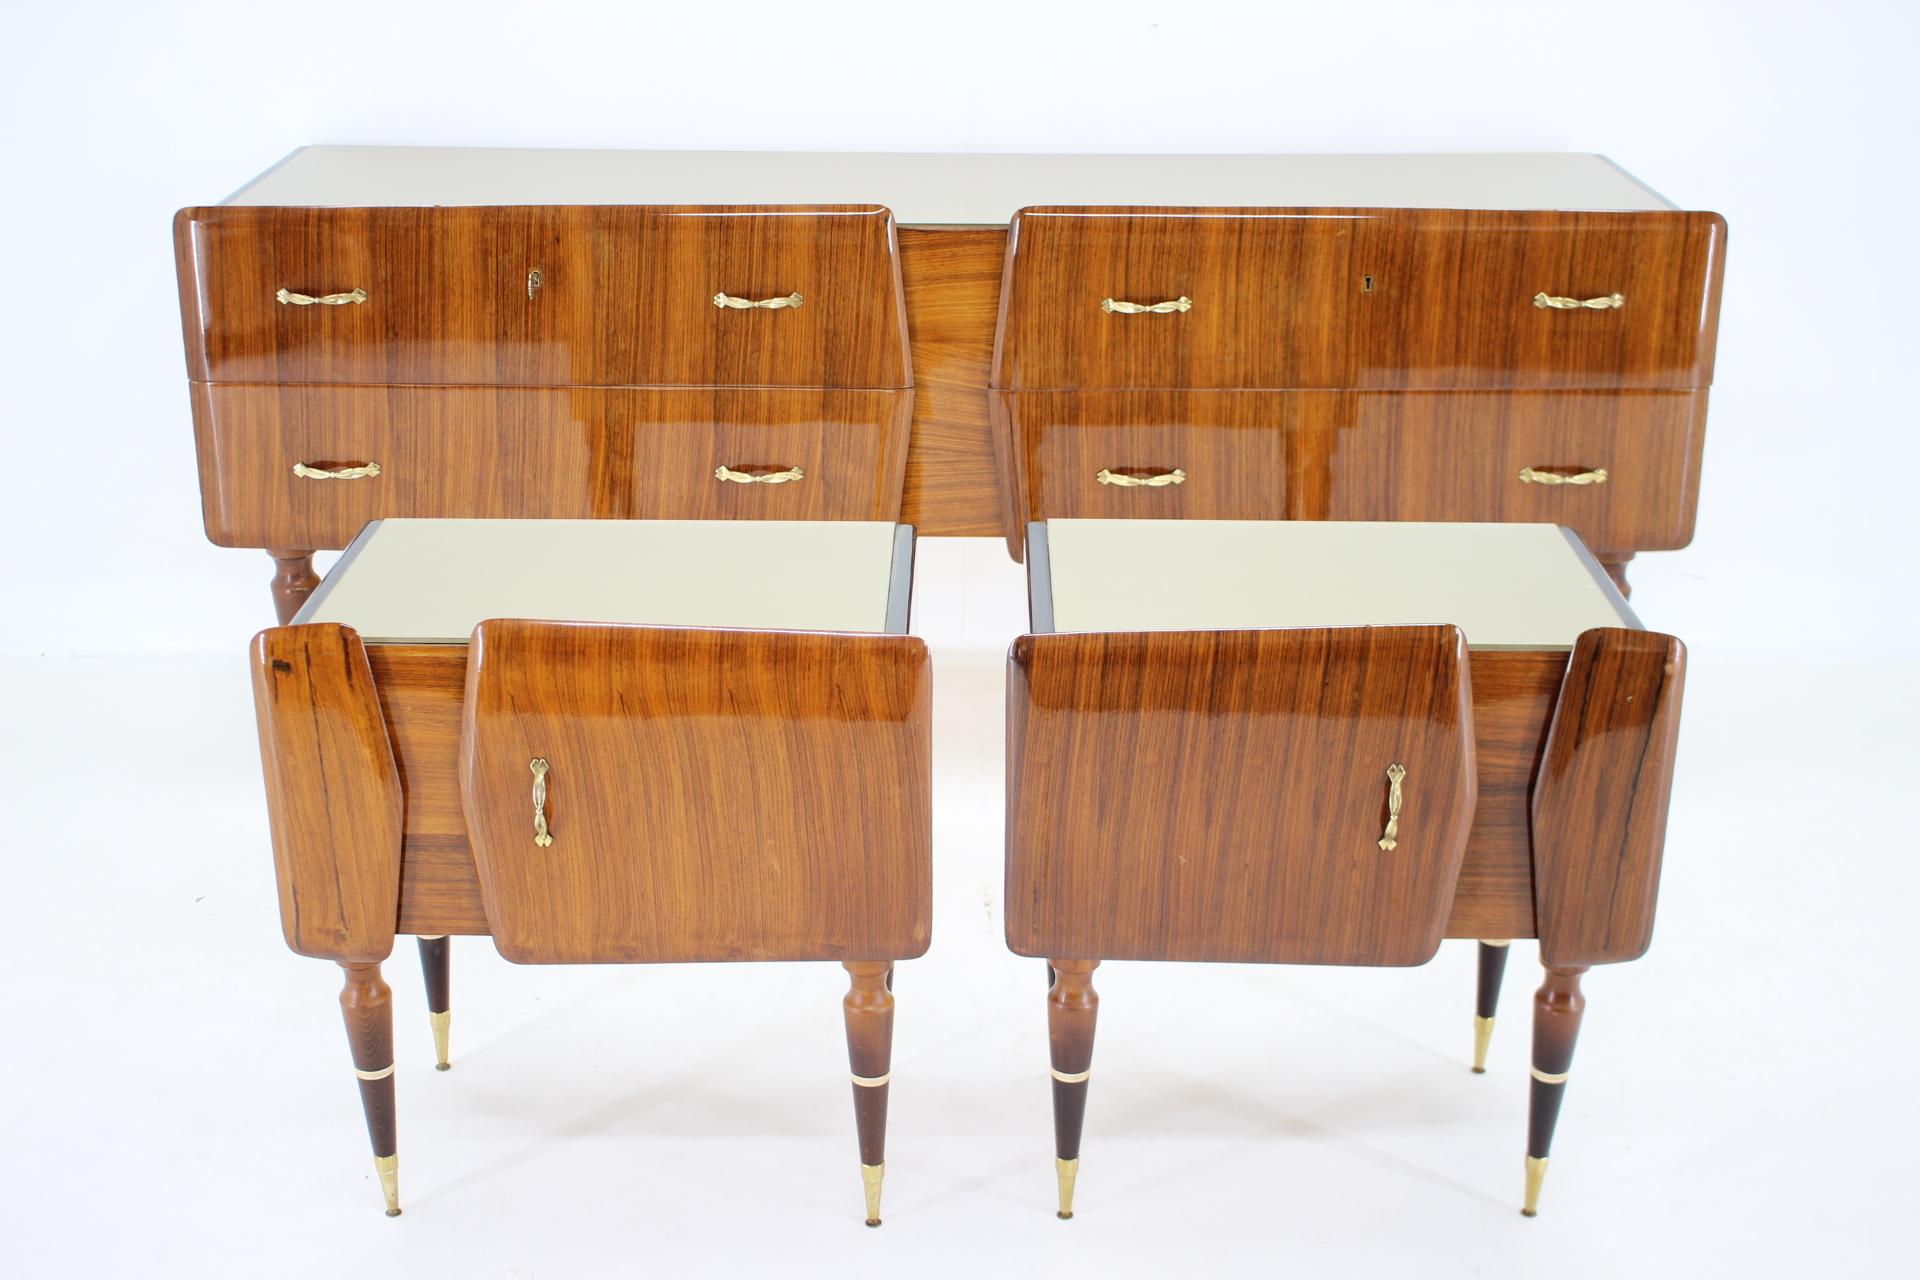 Mid-20th Century 1960s Set of Sculptural Wooden Bedside Tables and Sideboard, Italy For Sale